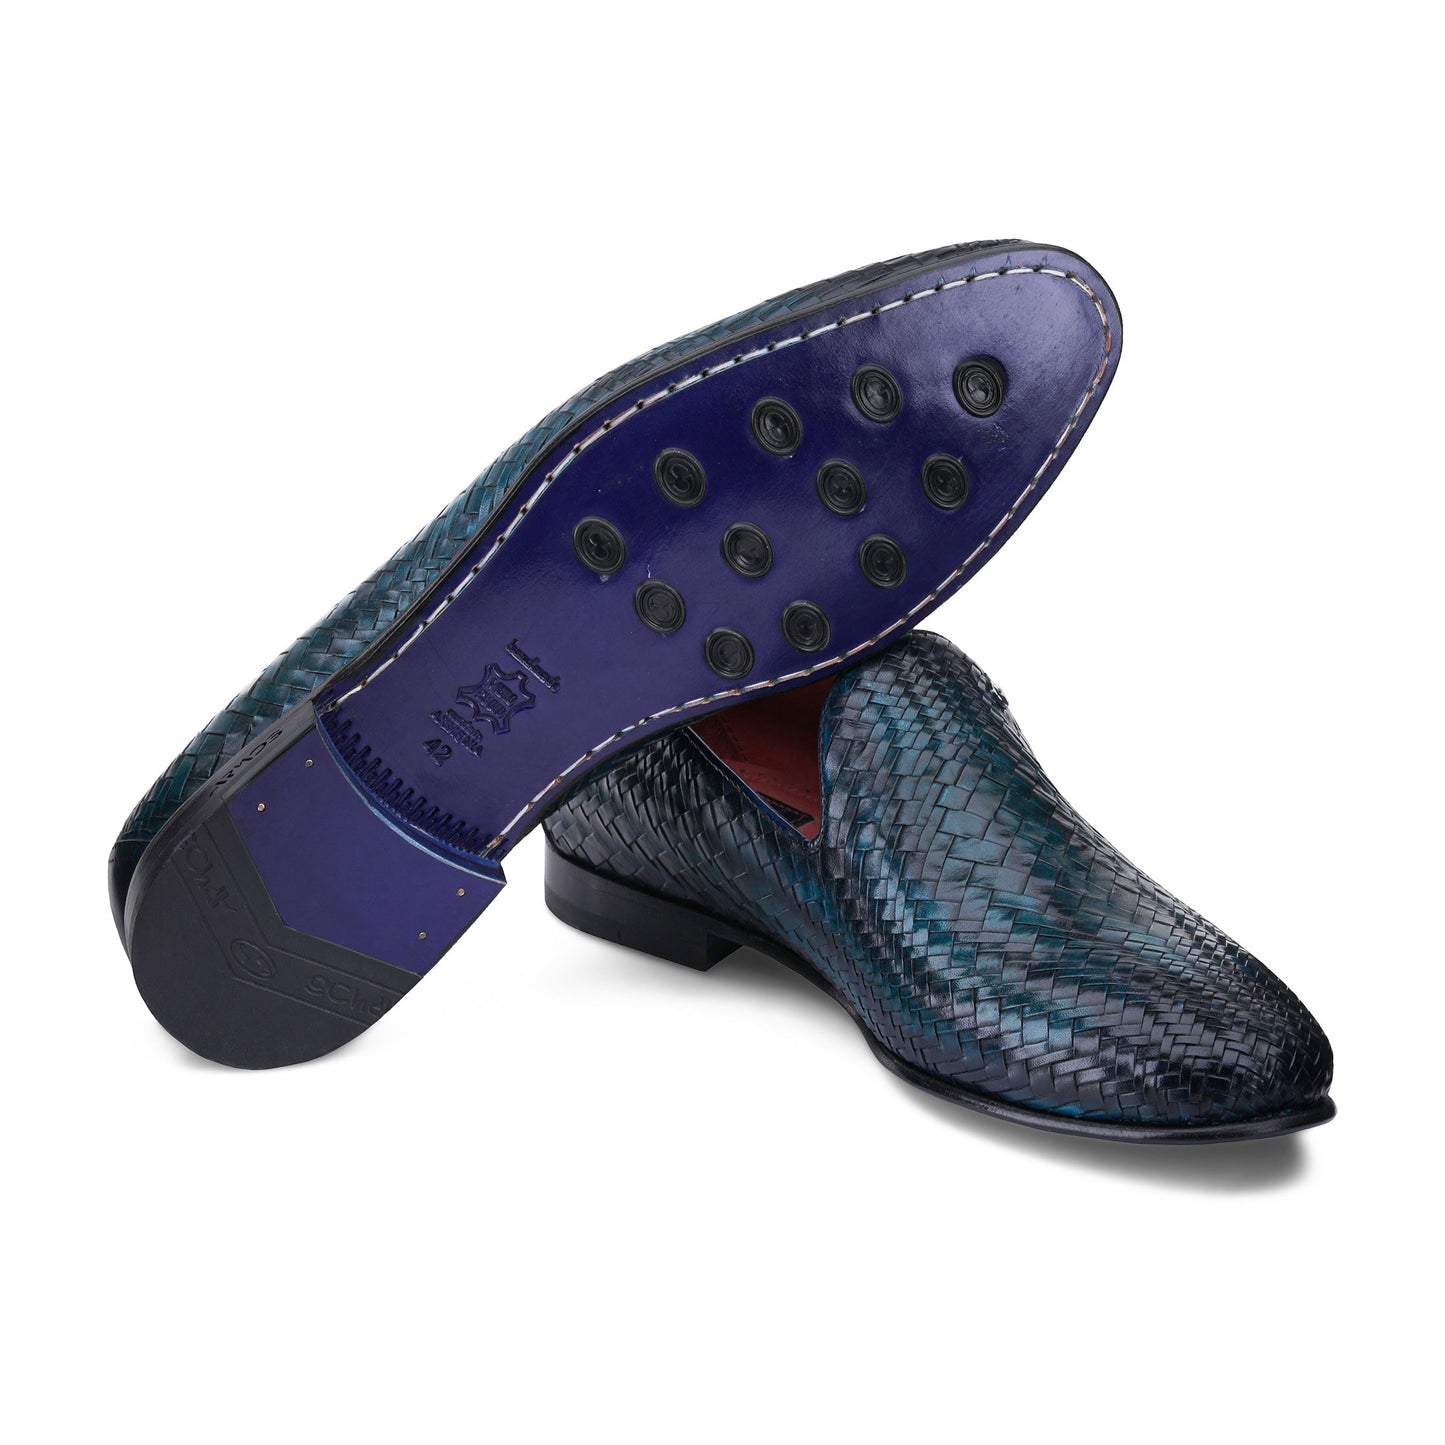 Blue woven loafers